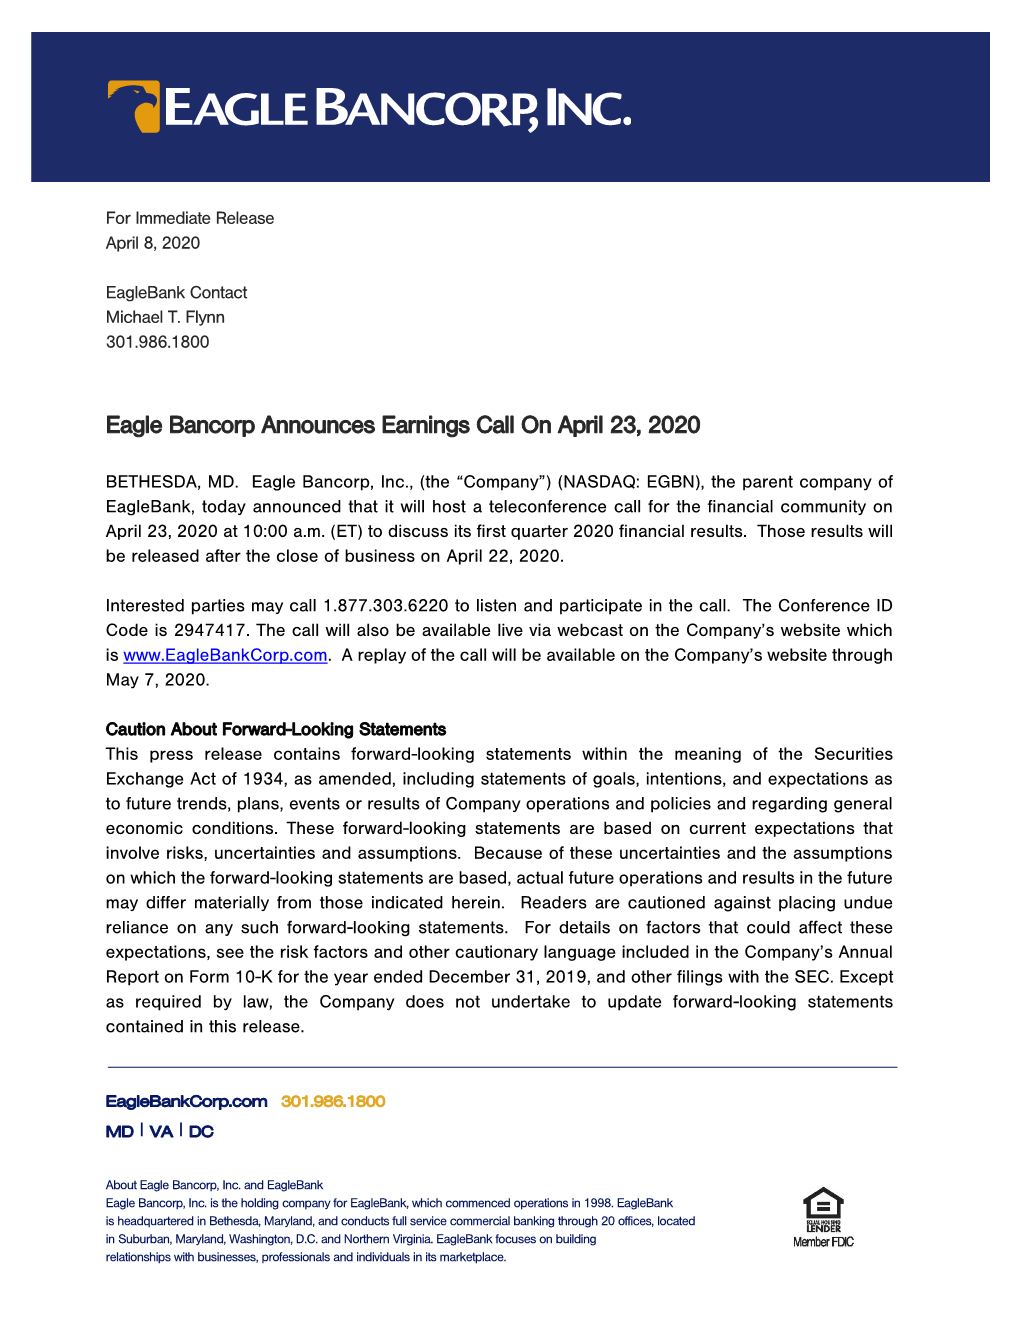 Eagle Bancorp Announces Earnings Call on April 23, 2020